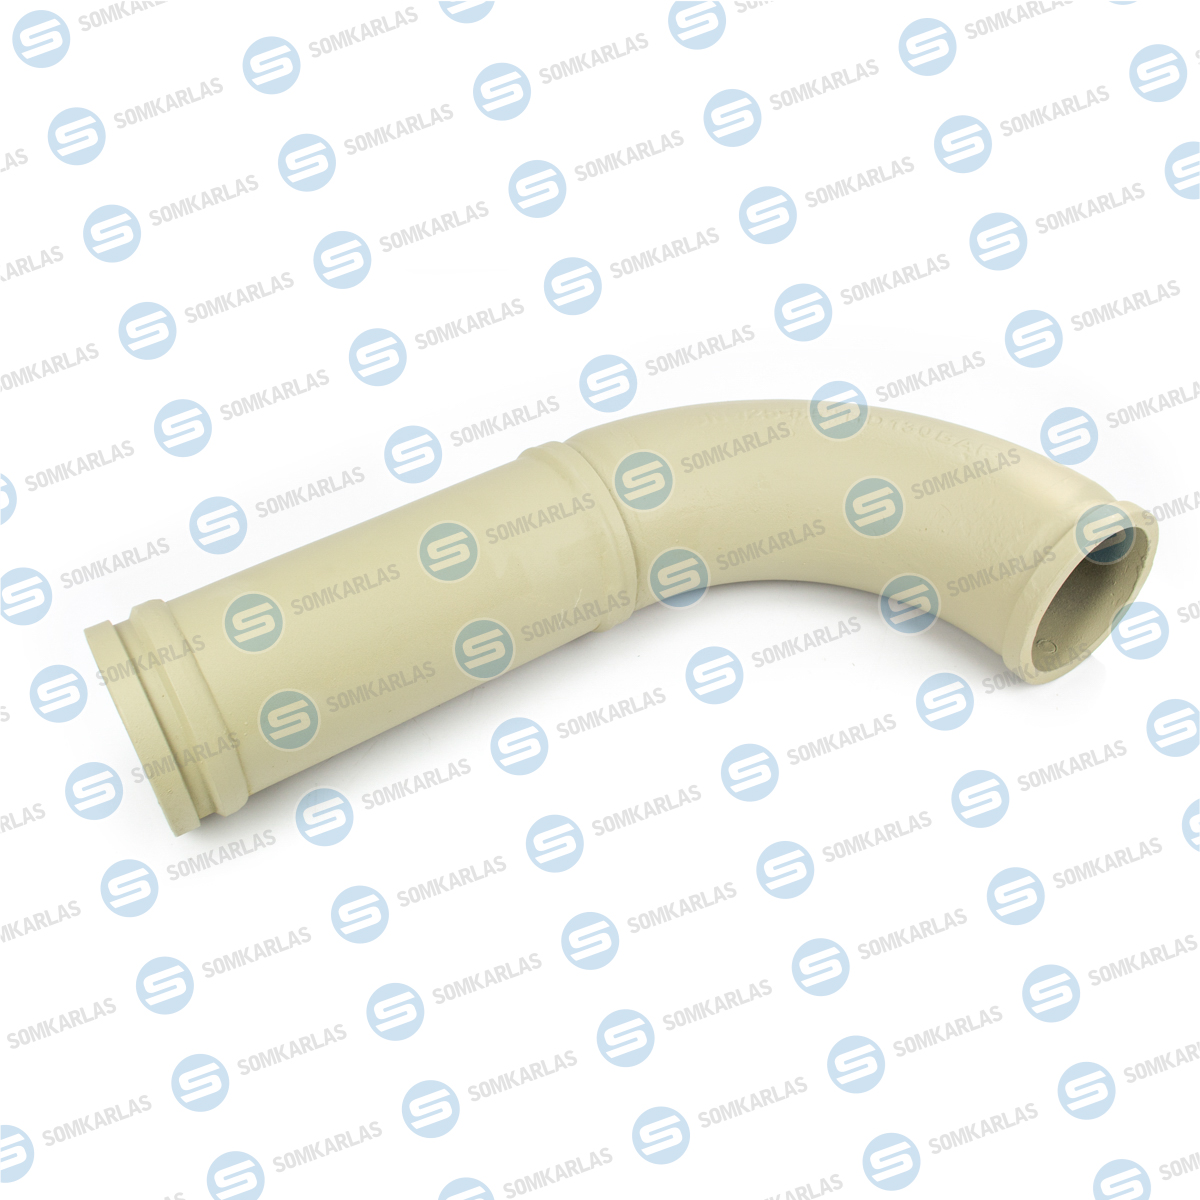 SOM30275 - ELBOW 90 DEGREE WITH 34cm EXT. 5,5